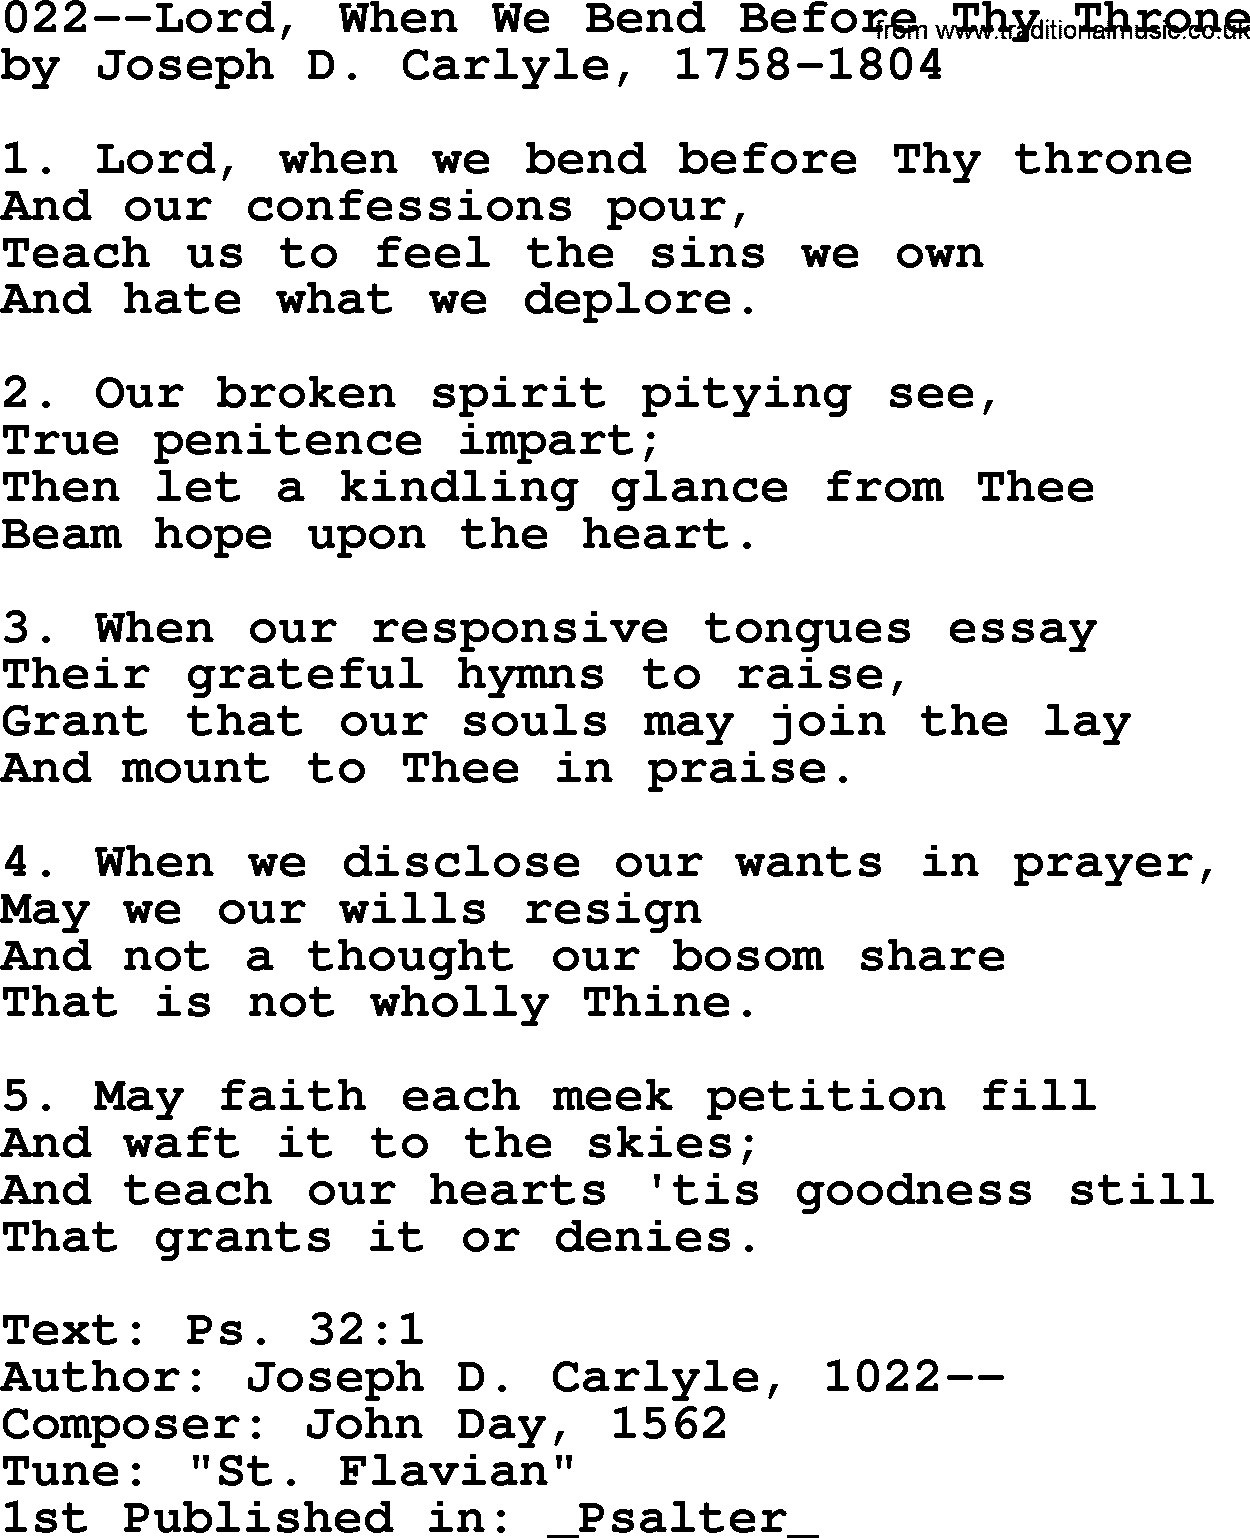 Lutheran Hymn: 022--Lord, When We Bend Before Thy Throne.txt lyrics with PDF